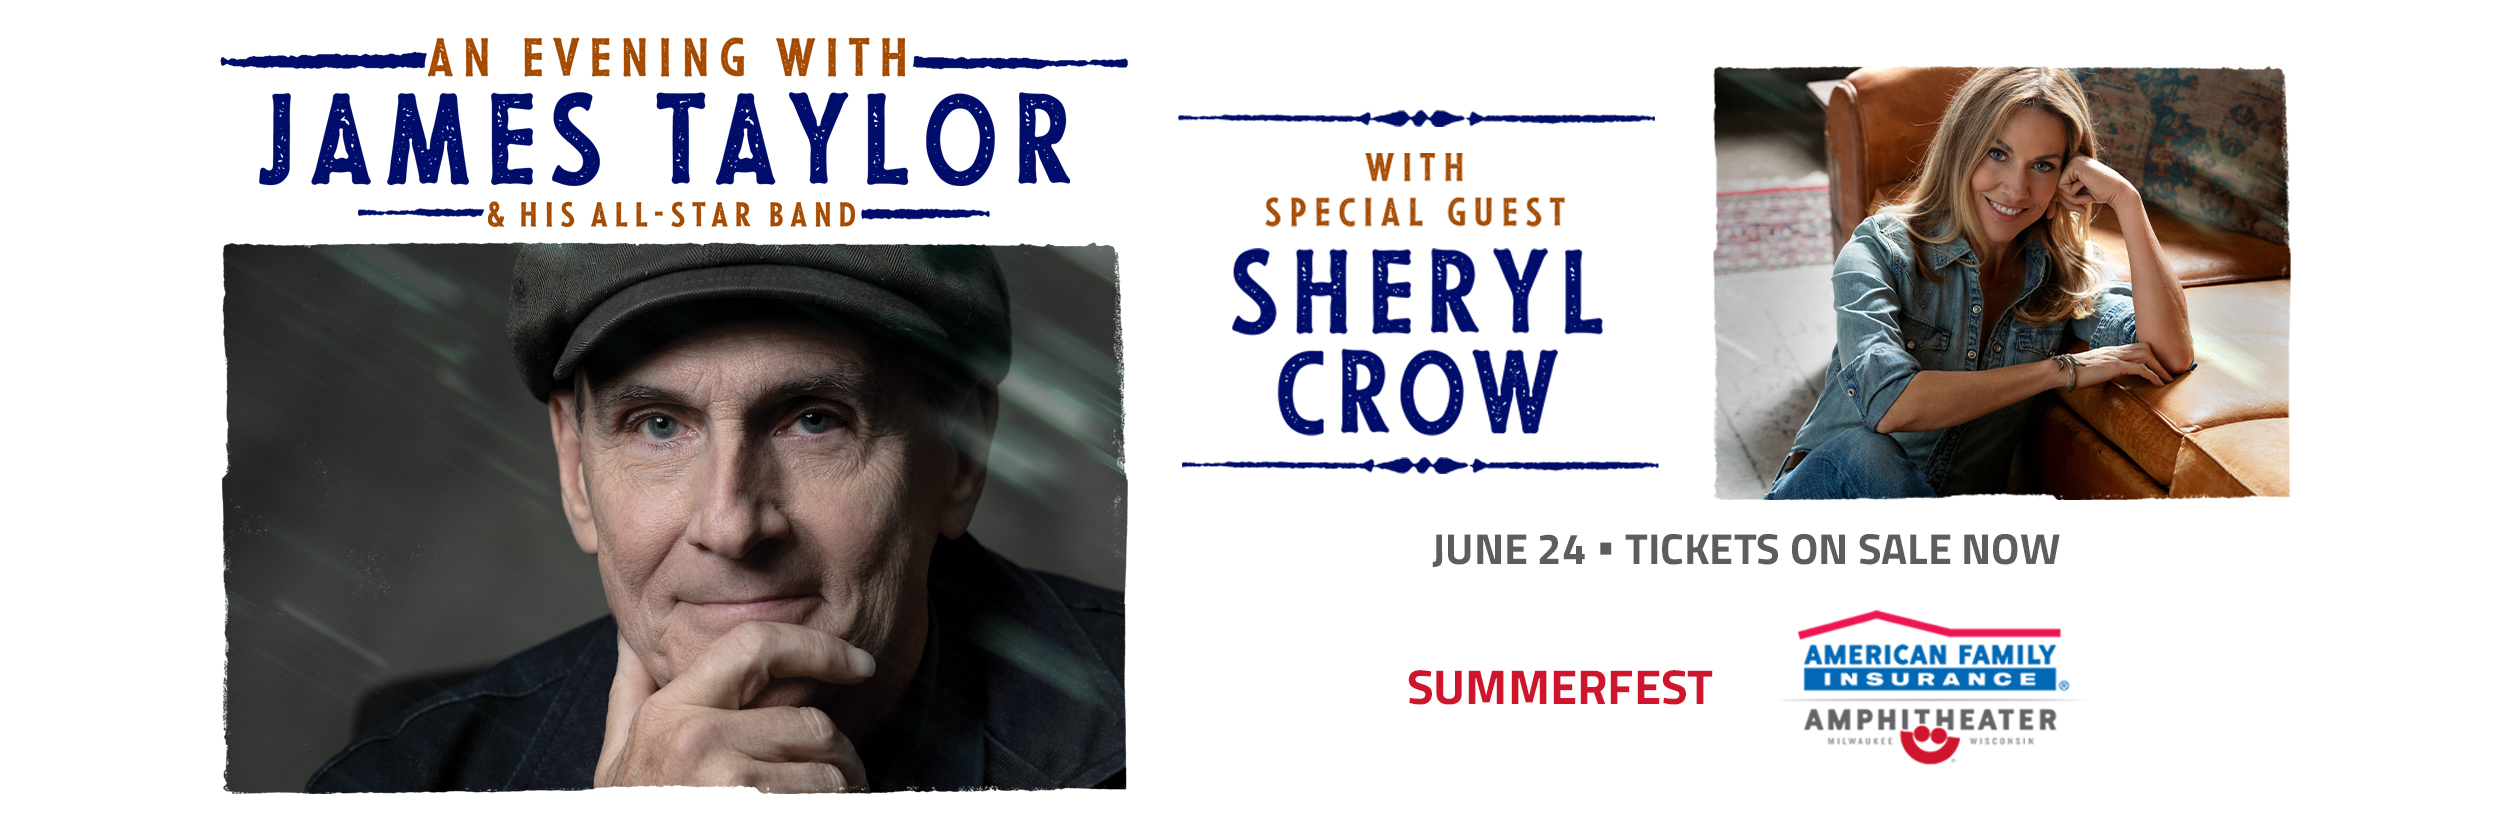 James Taylor & His All-Star Band Headline Summerfest with Sheryl Crow on June 24, 2023